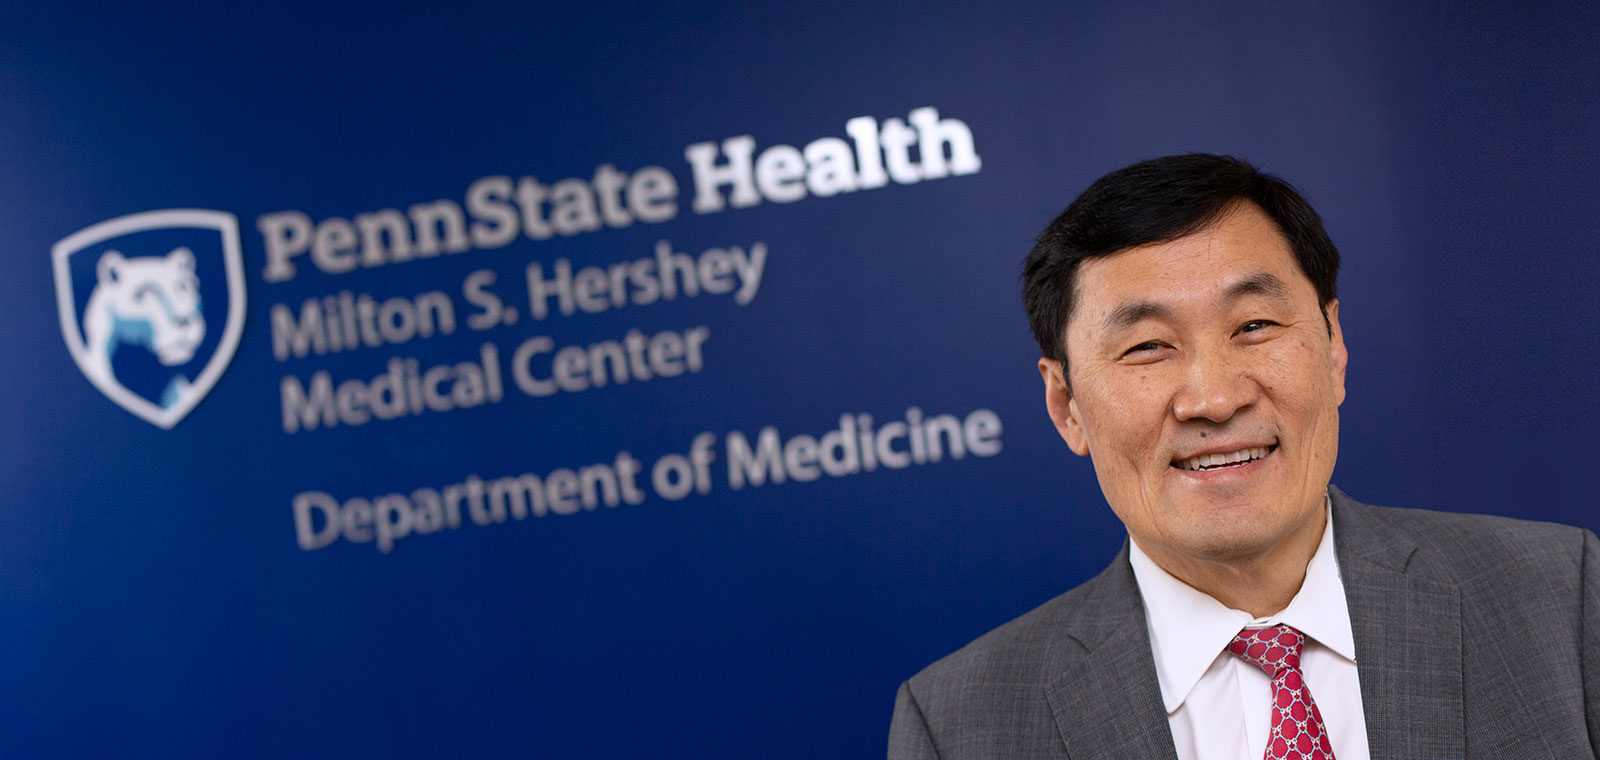 Dr. Thomas Ma, chair of the Department of Medicine at Penn State College of Medicine, is pictured in front of a blue photo backdrop with the department's logo. He is talking animatedly and looks happy.